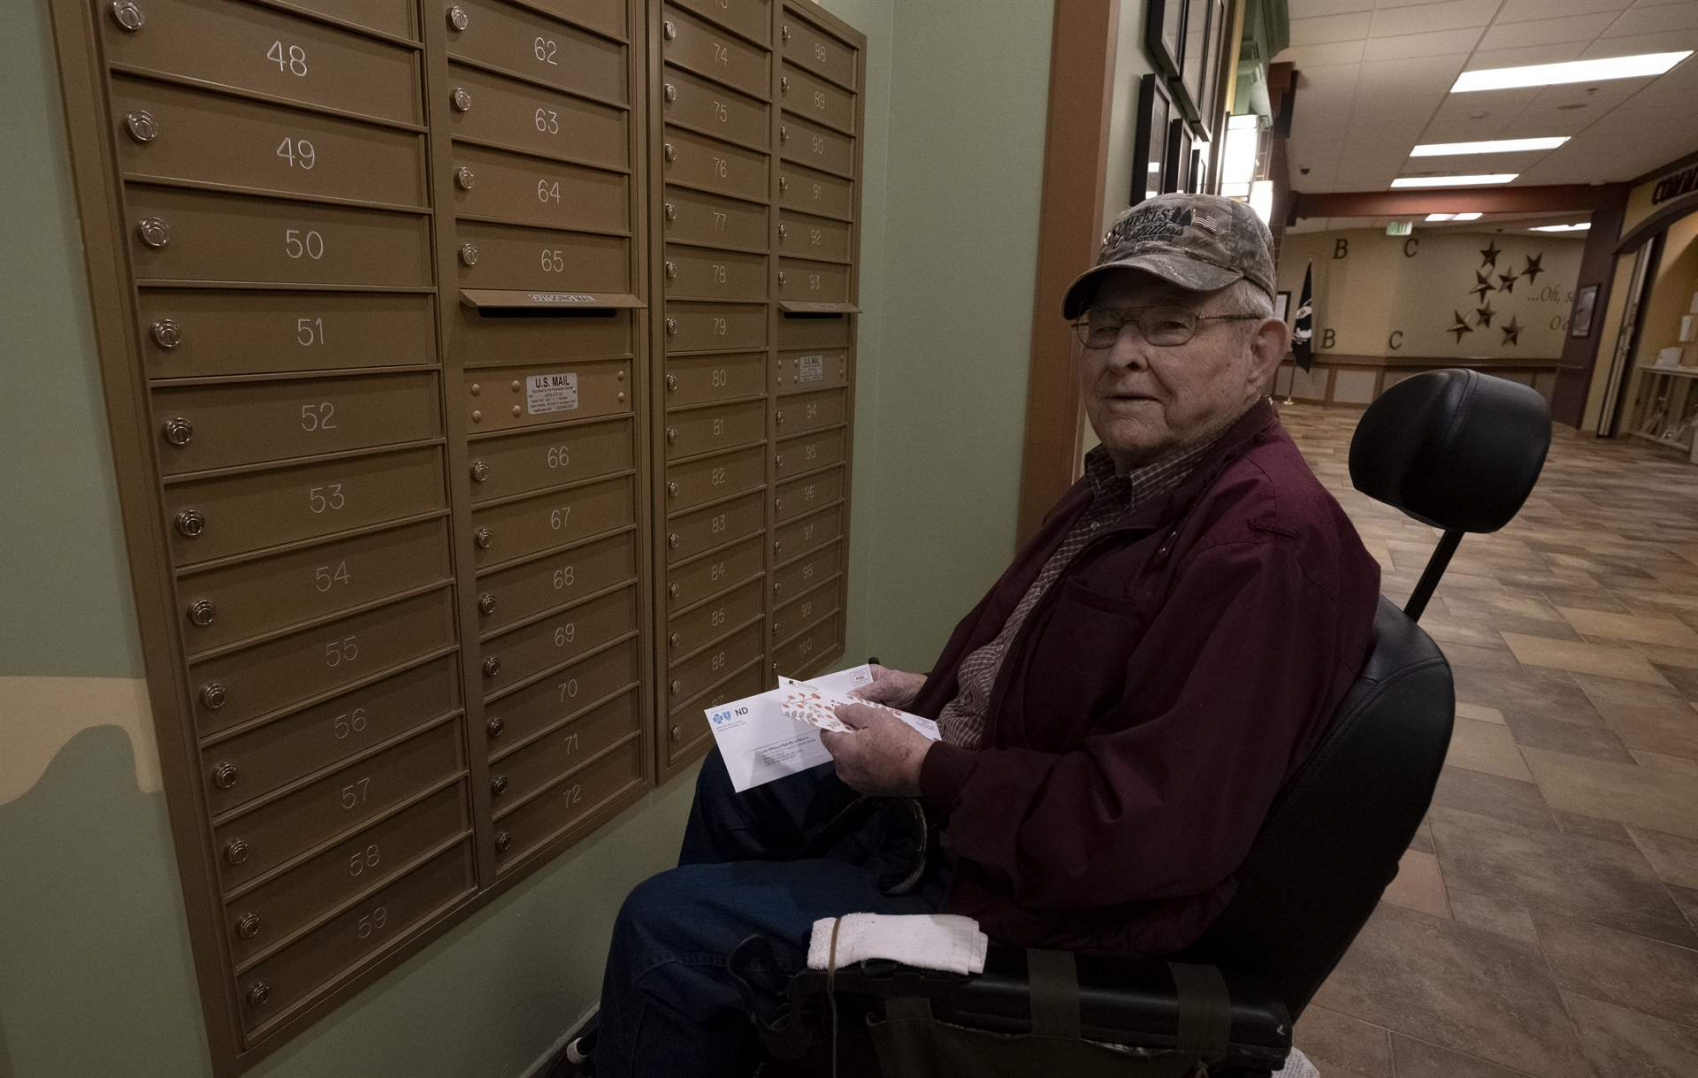 A resident of the North Dakota Veterans Home checking his mail in the mail area.